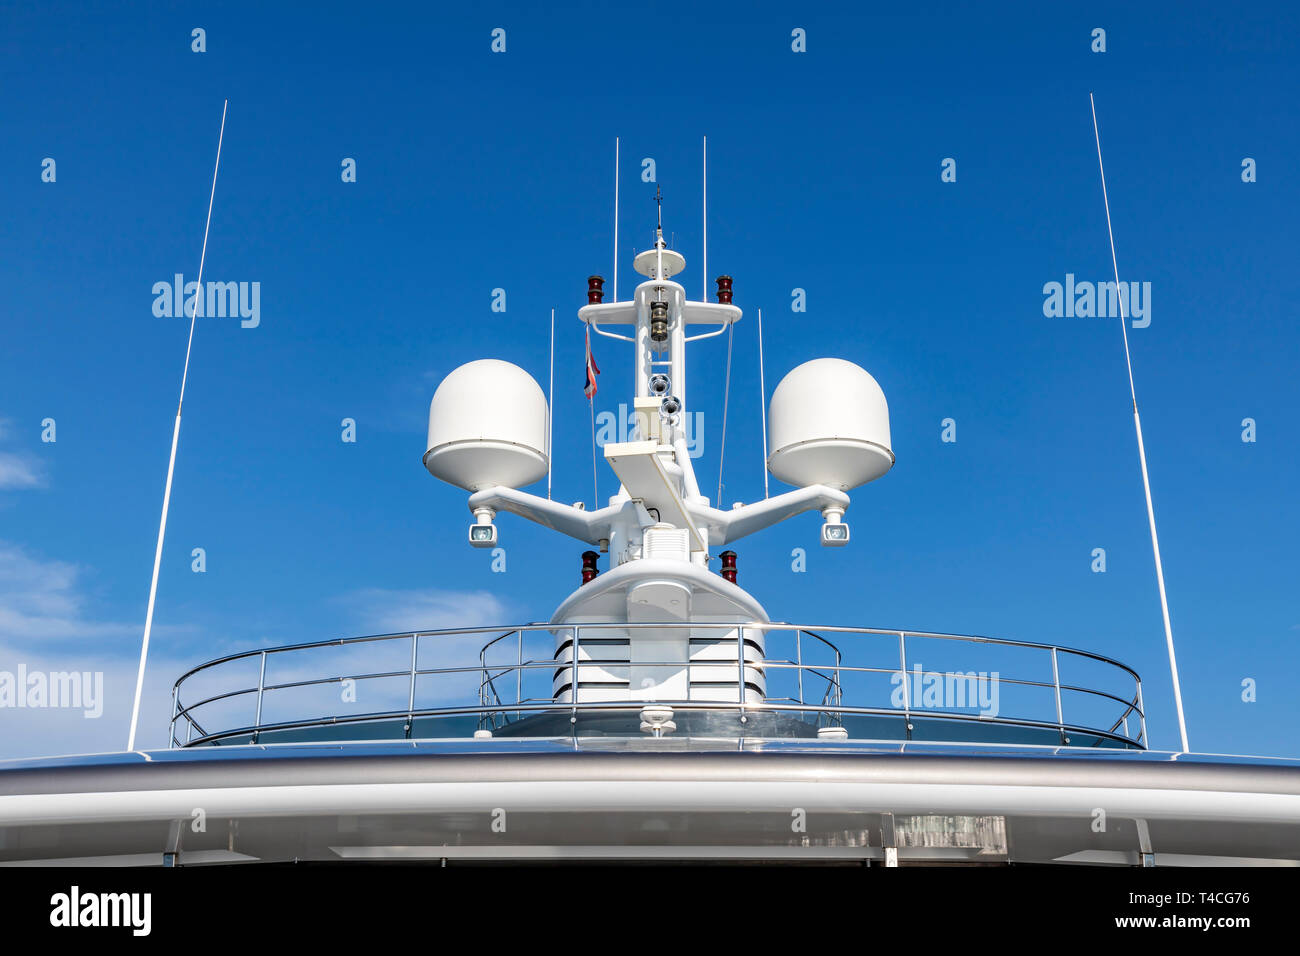 Communication antennas with navigation equipment, radar on the upper deck of the luxury white cruise ship.  There is a Thai flag with clear blue sky i Stock Photo